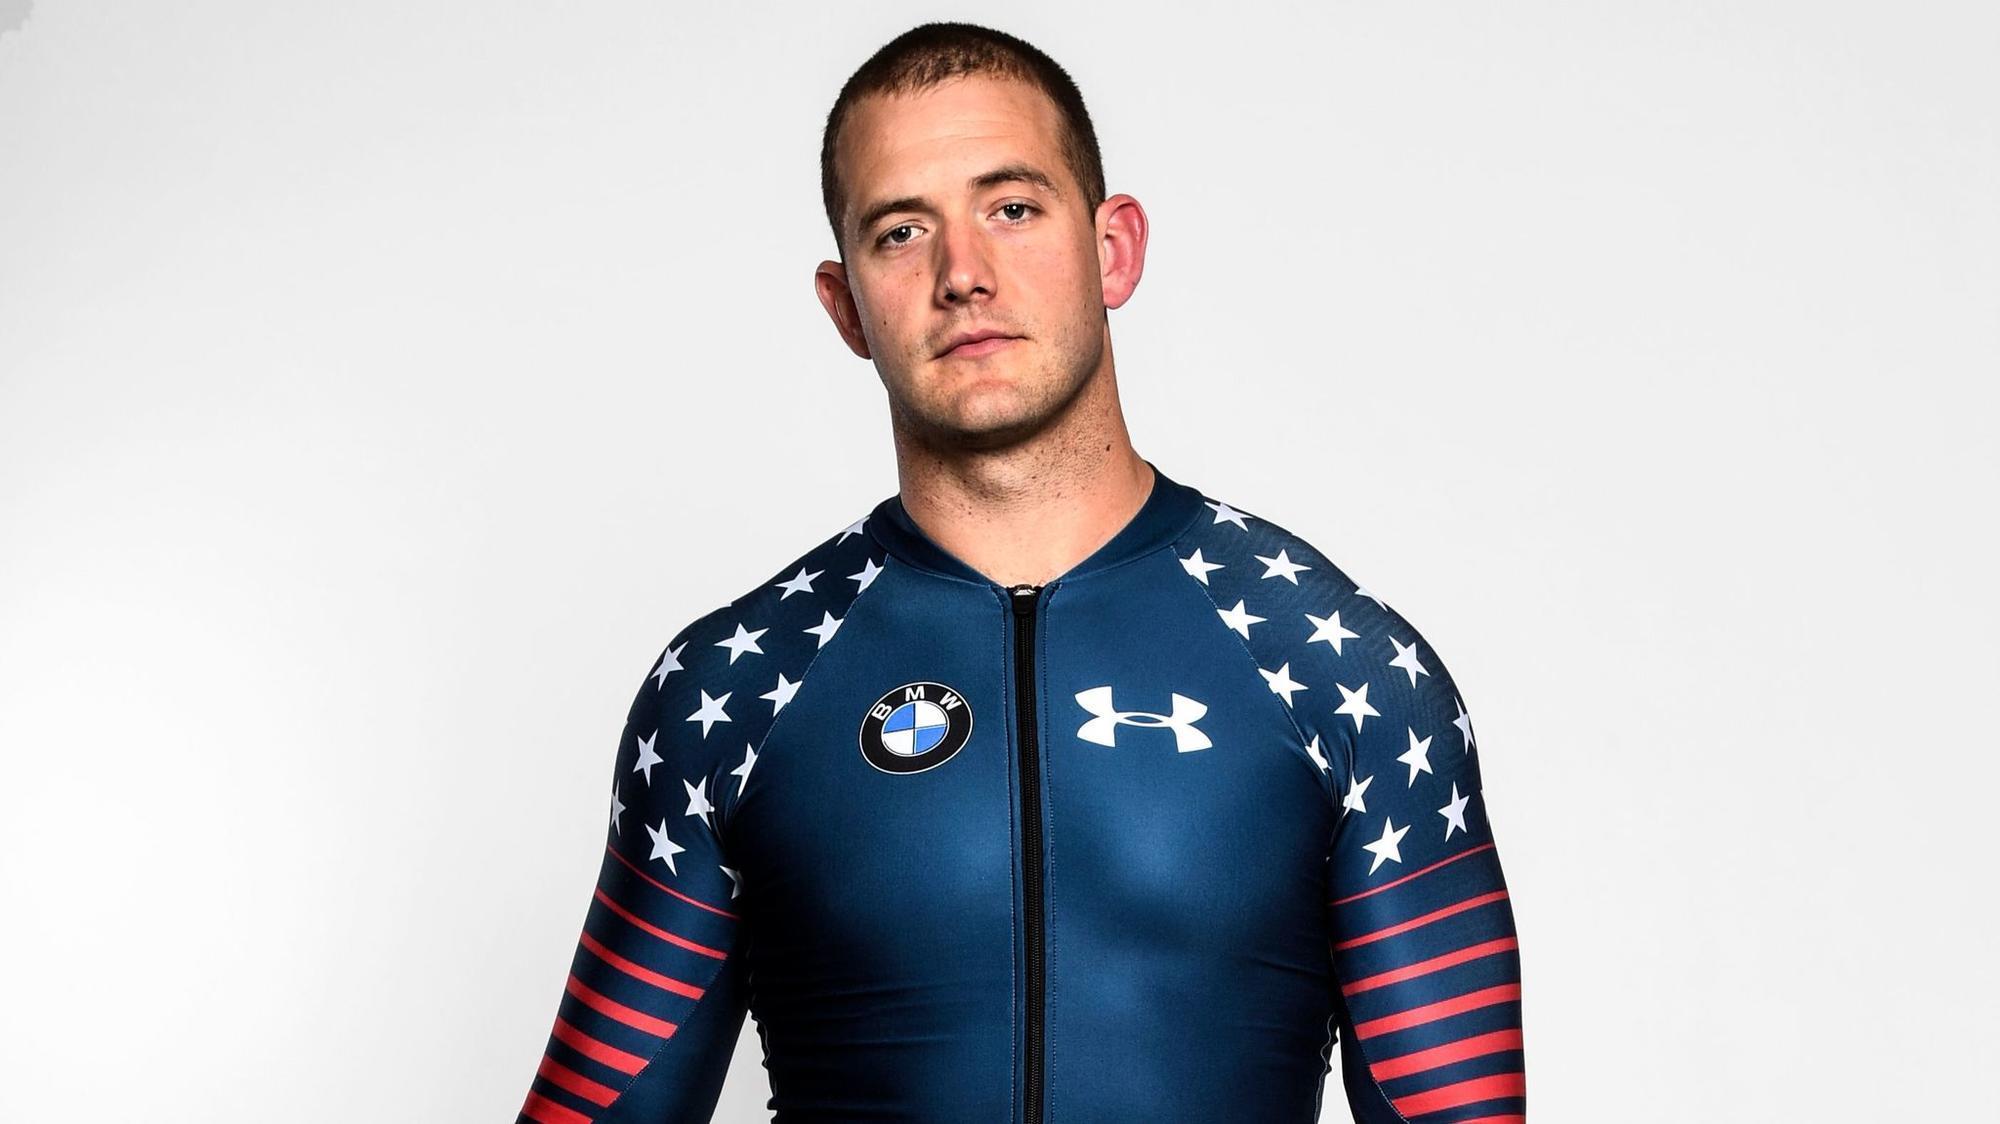 Days after losing his appendix, Justin Olsen is happy to be back in his bobsled